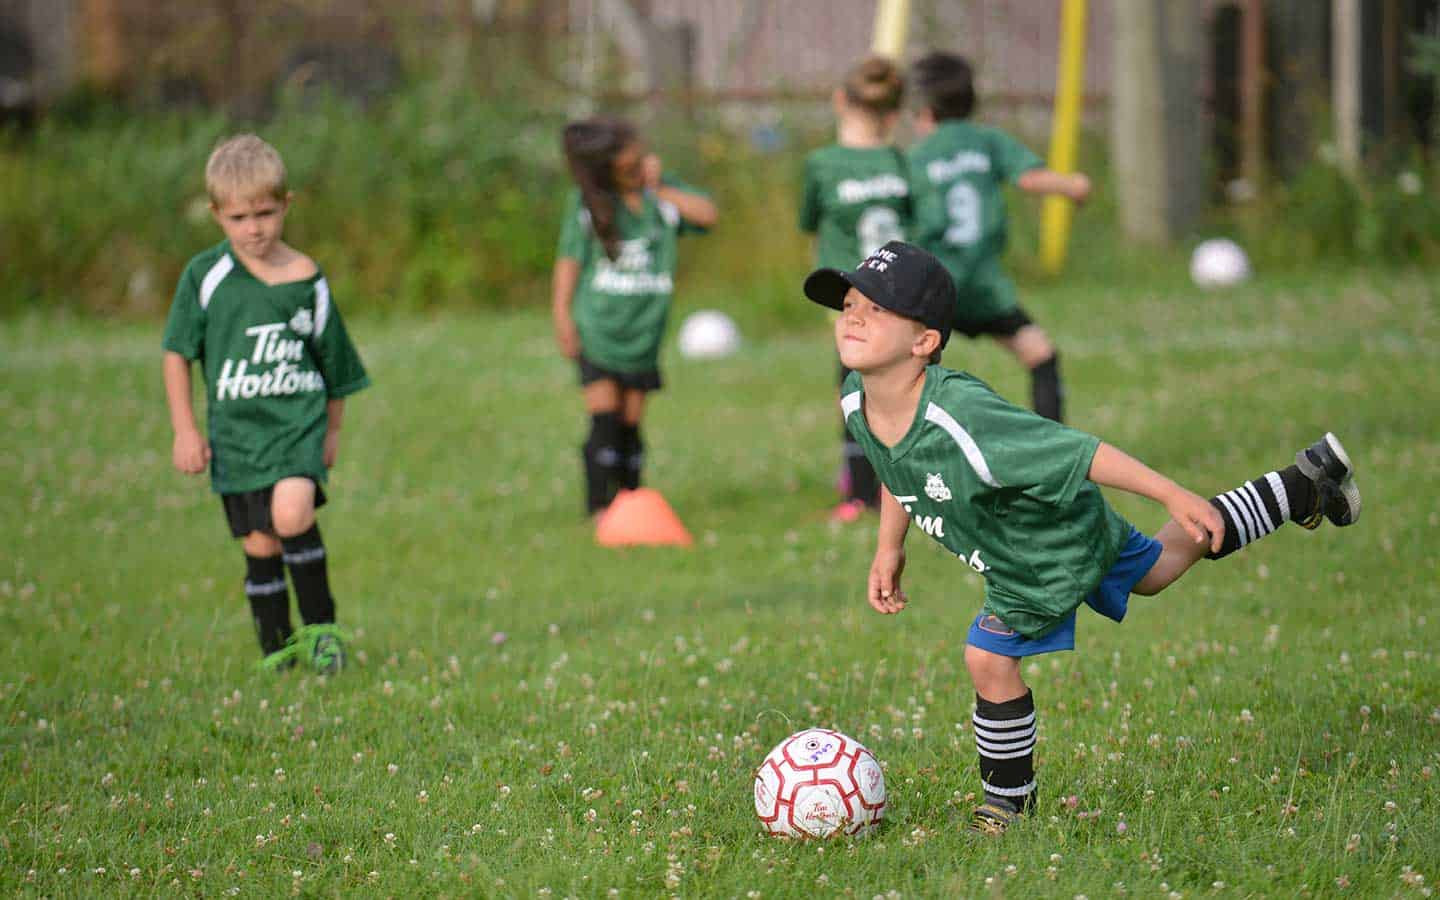 Local soccer season to be delayed; potentially shortened